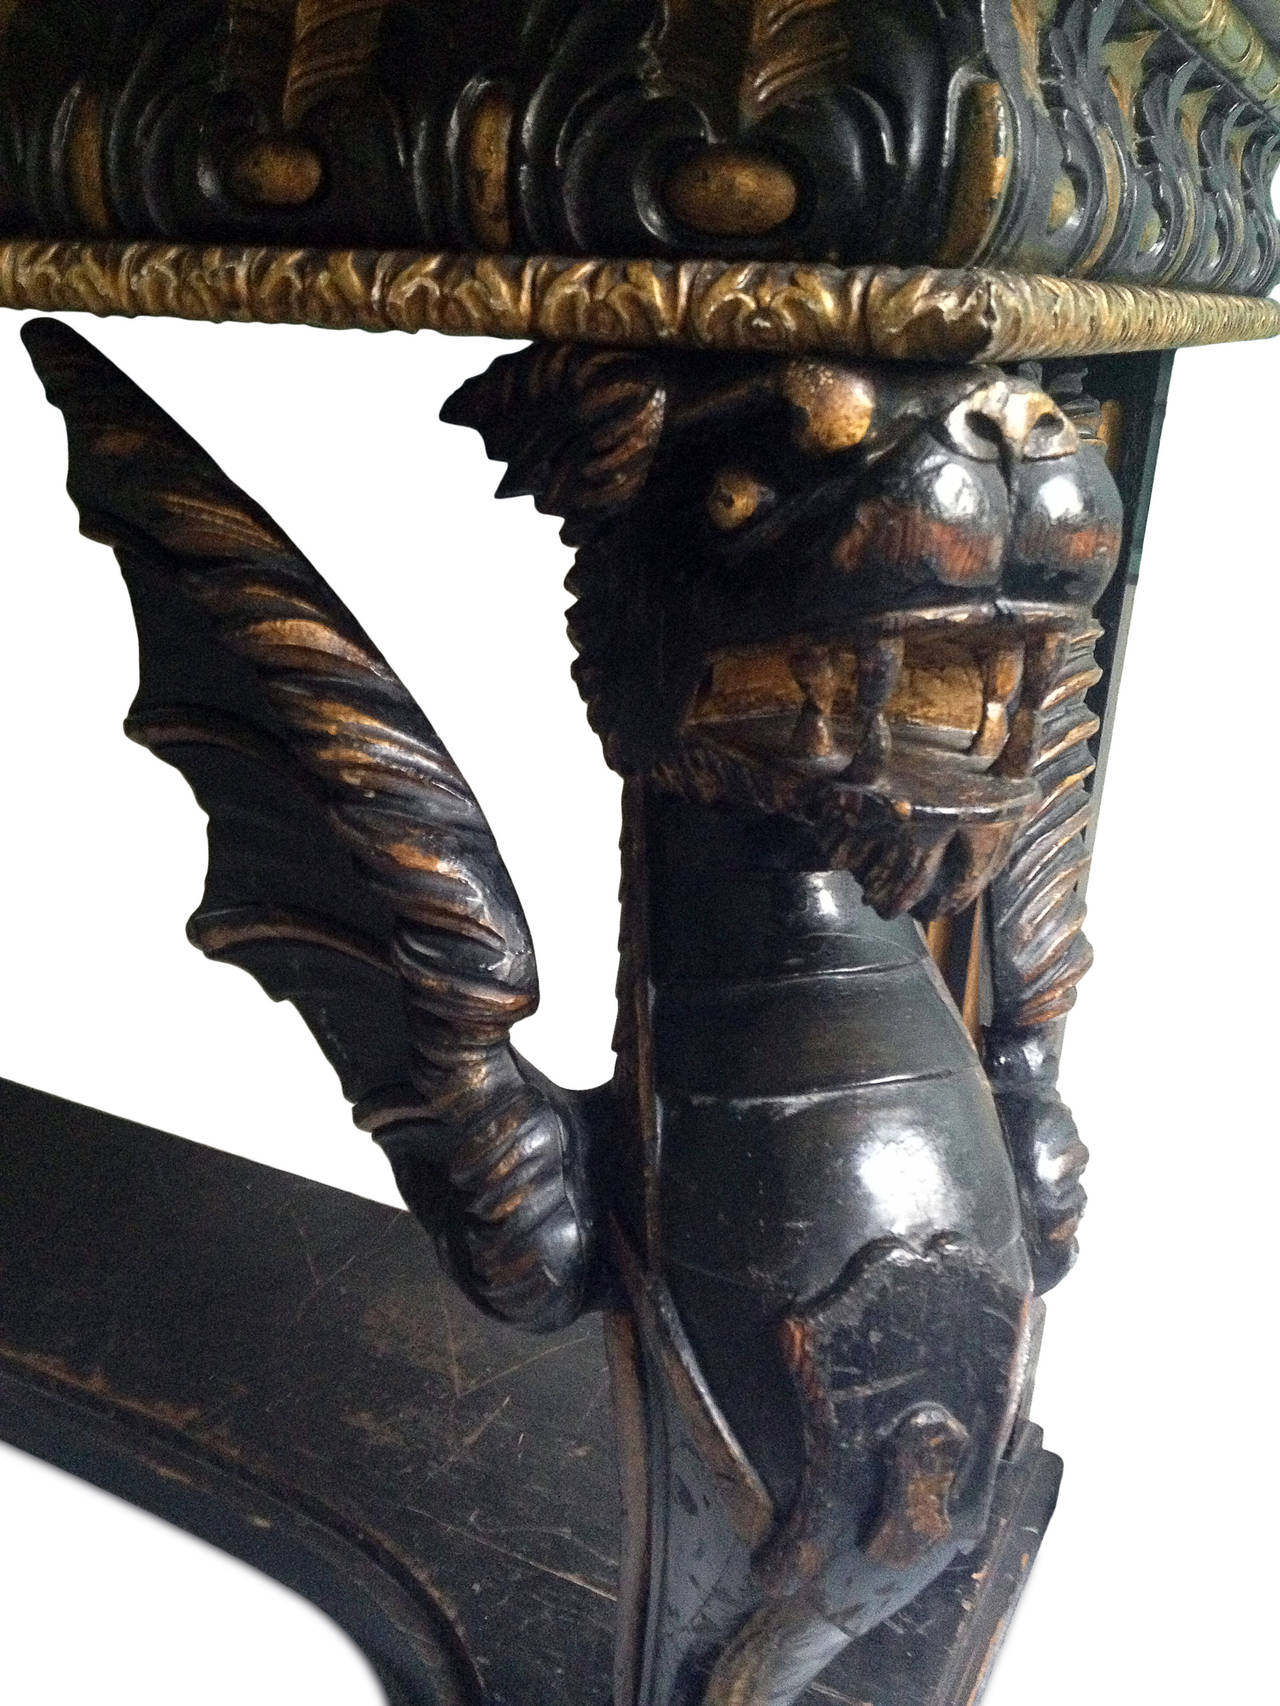 Painted and gilt Italian console table, beautifully sculpted and decorated with winged dragons. Top made of giallo antico marble.